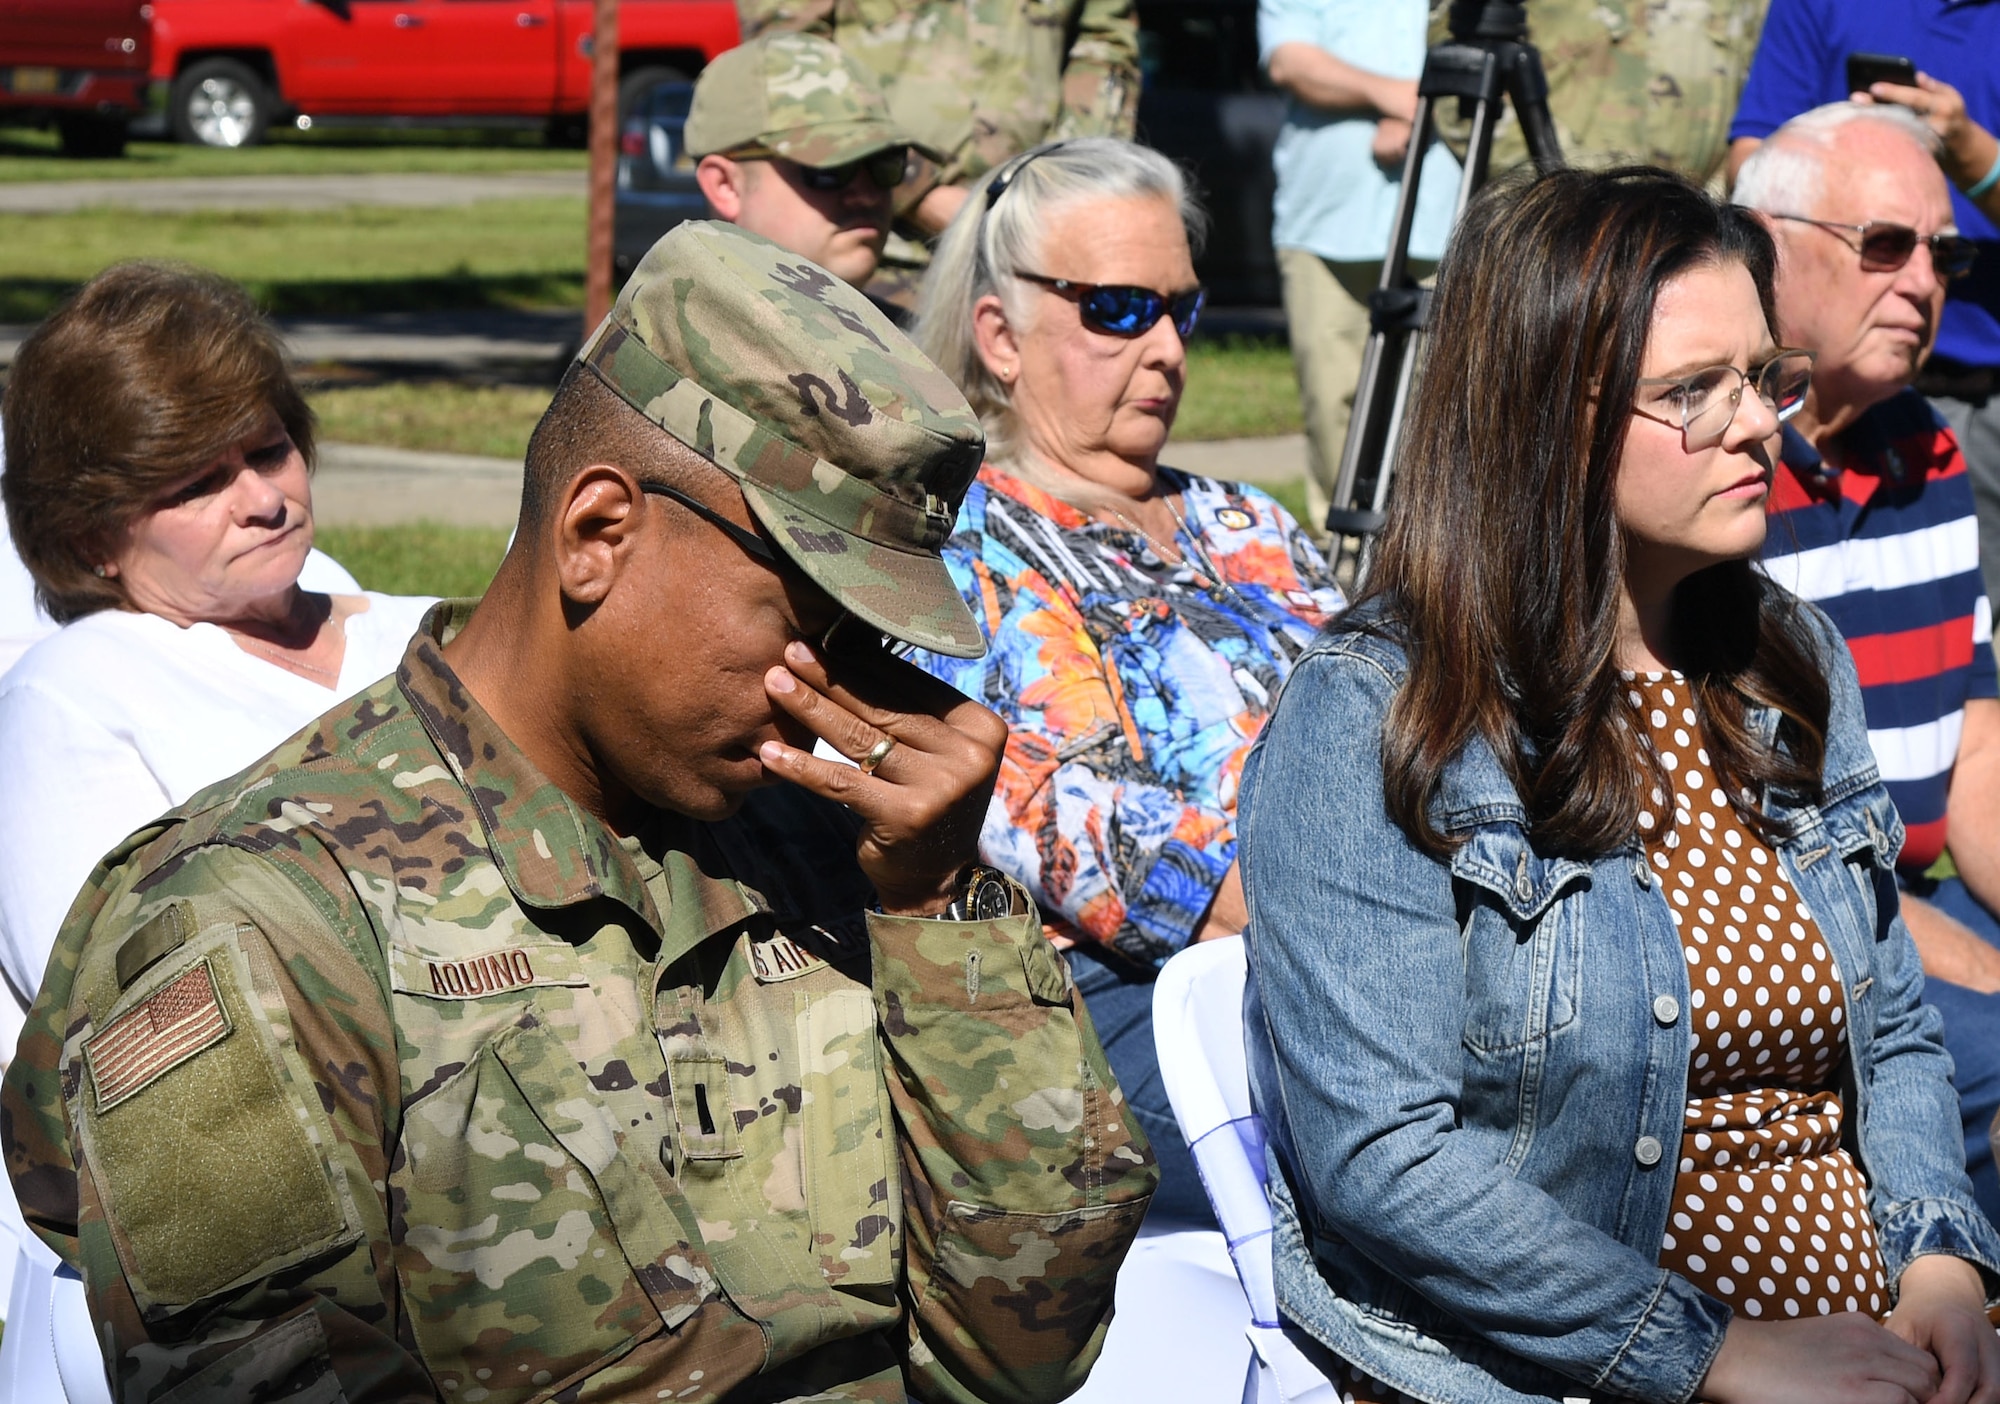 U.S. Air Force Chaplain (1st Lt.) Angel Aquino, 81st Training Wing chaplain, wipes his eyes during the Air Force Families Forever Fallen Heroes Butterfly Garden dedication ceremony at the marina park at Keesler Air Force Base, Mississippi, Sept. 24, 2021. The garden was created as a designated location where the families of our fallen heroes can find a serene area to pay tribute to their loved one as well as honoring our fallen service members. (U.S. Air Force photo by Kemberly Groue)